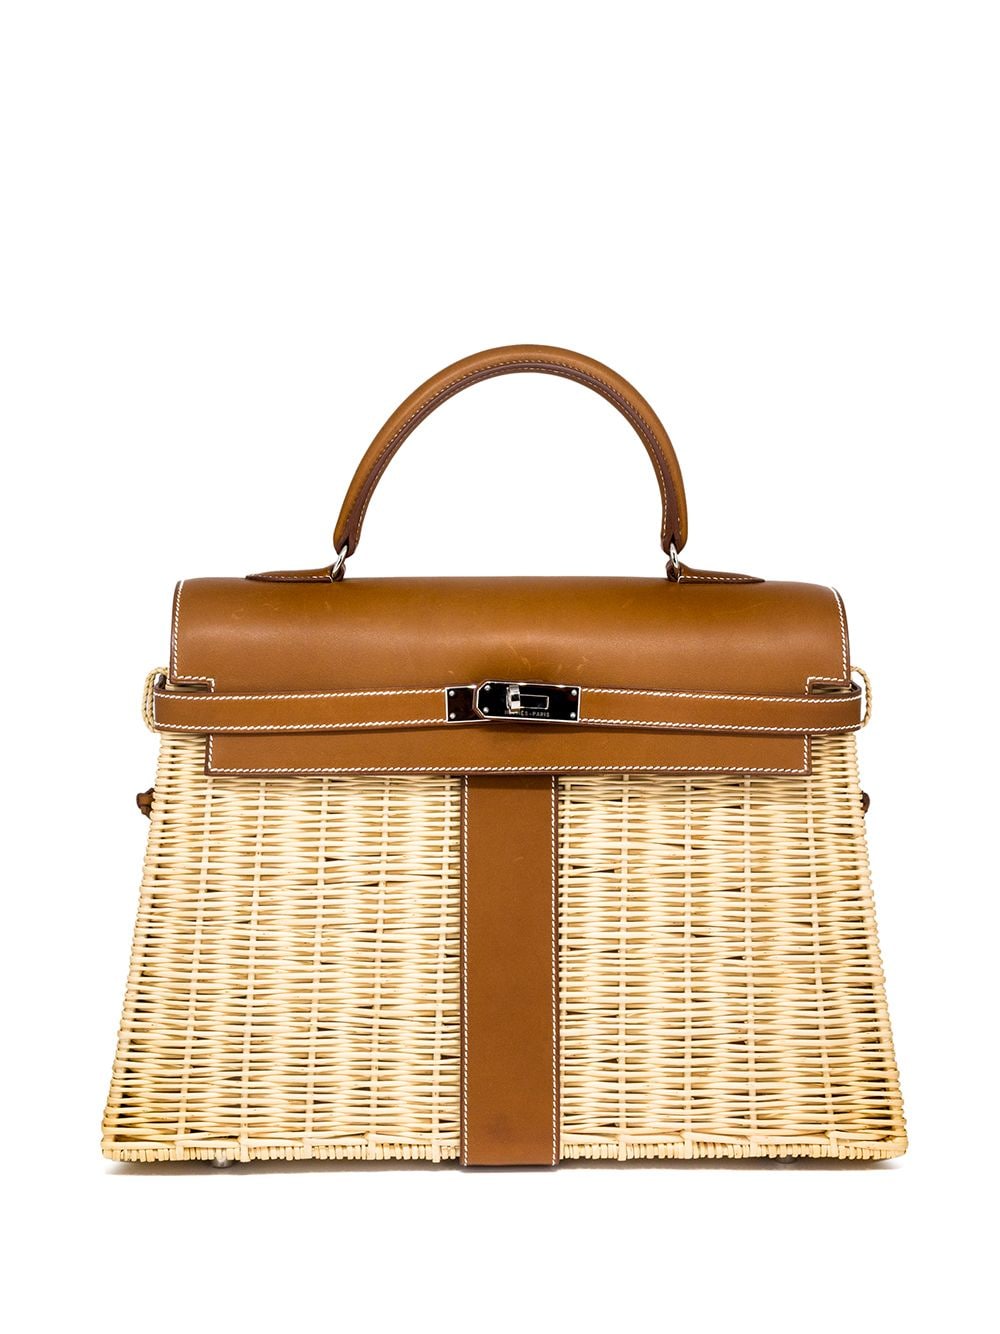 Hermès - 2011 pre-owned Kelly 35cm picnic bag - women - Leather/Straw/Leather/Silver Plated Metal - One Size - Neutrals